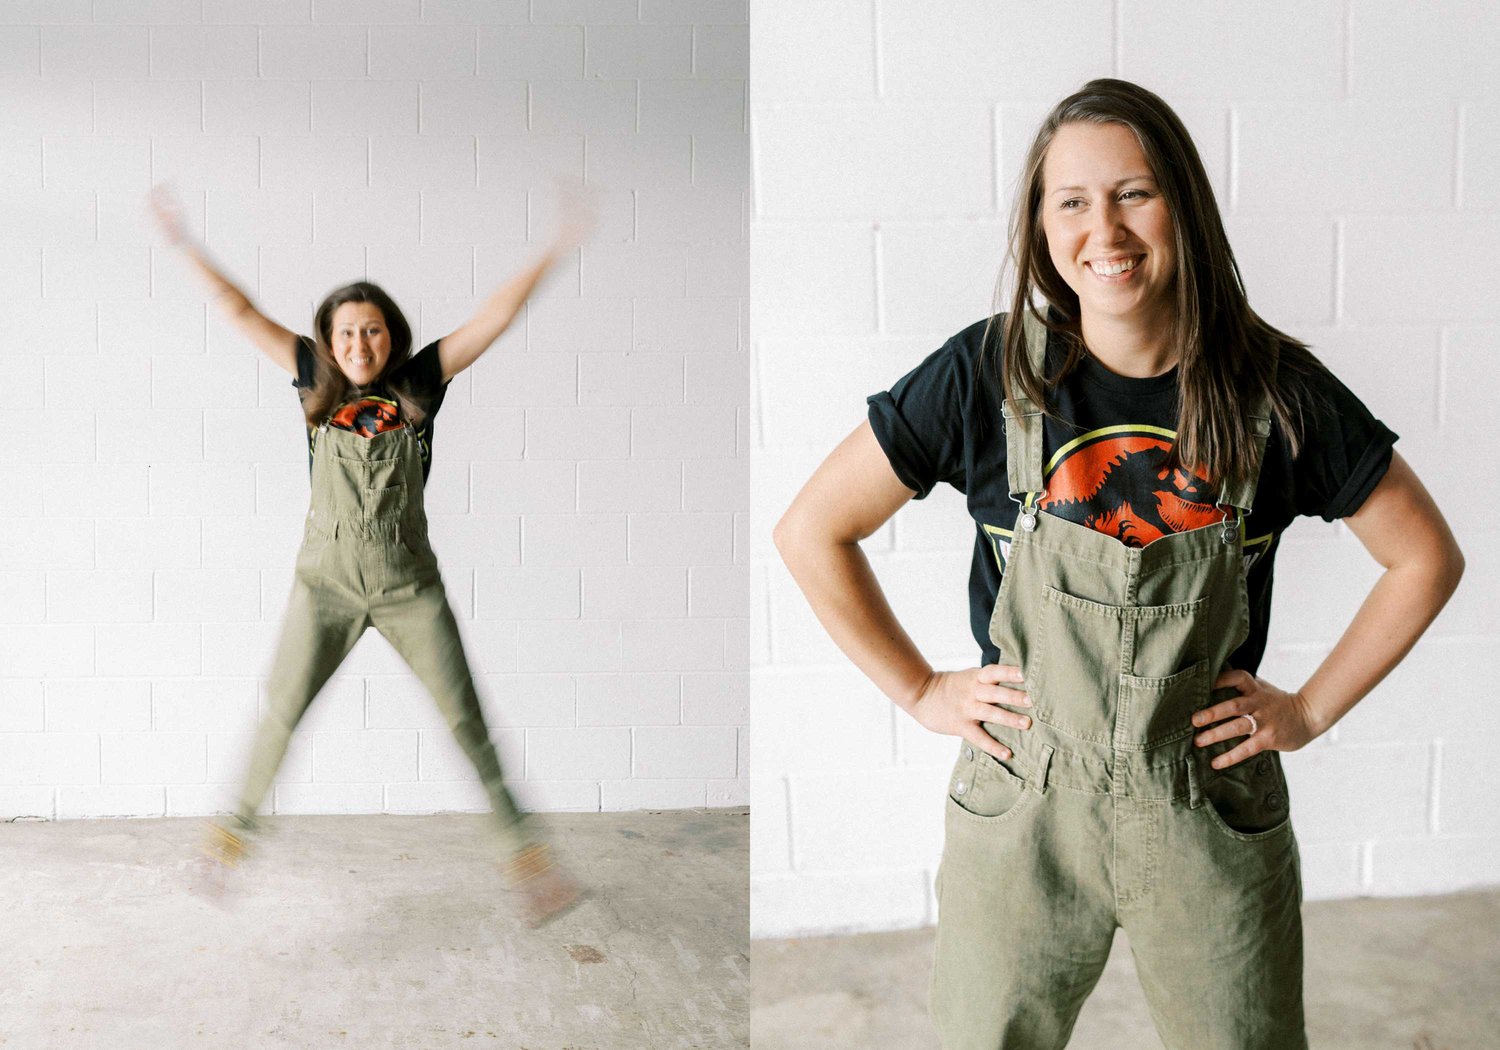 A lady in green overalls does a jumping jack in front of a white brick wall